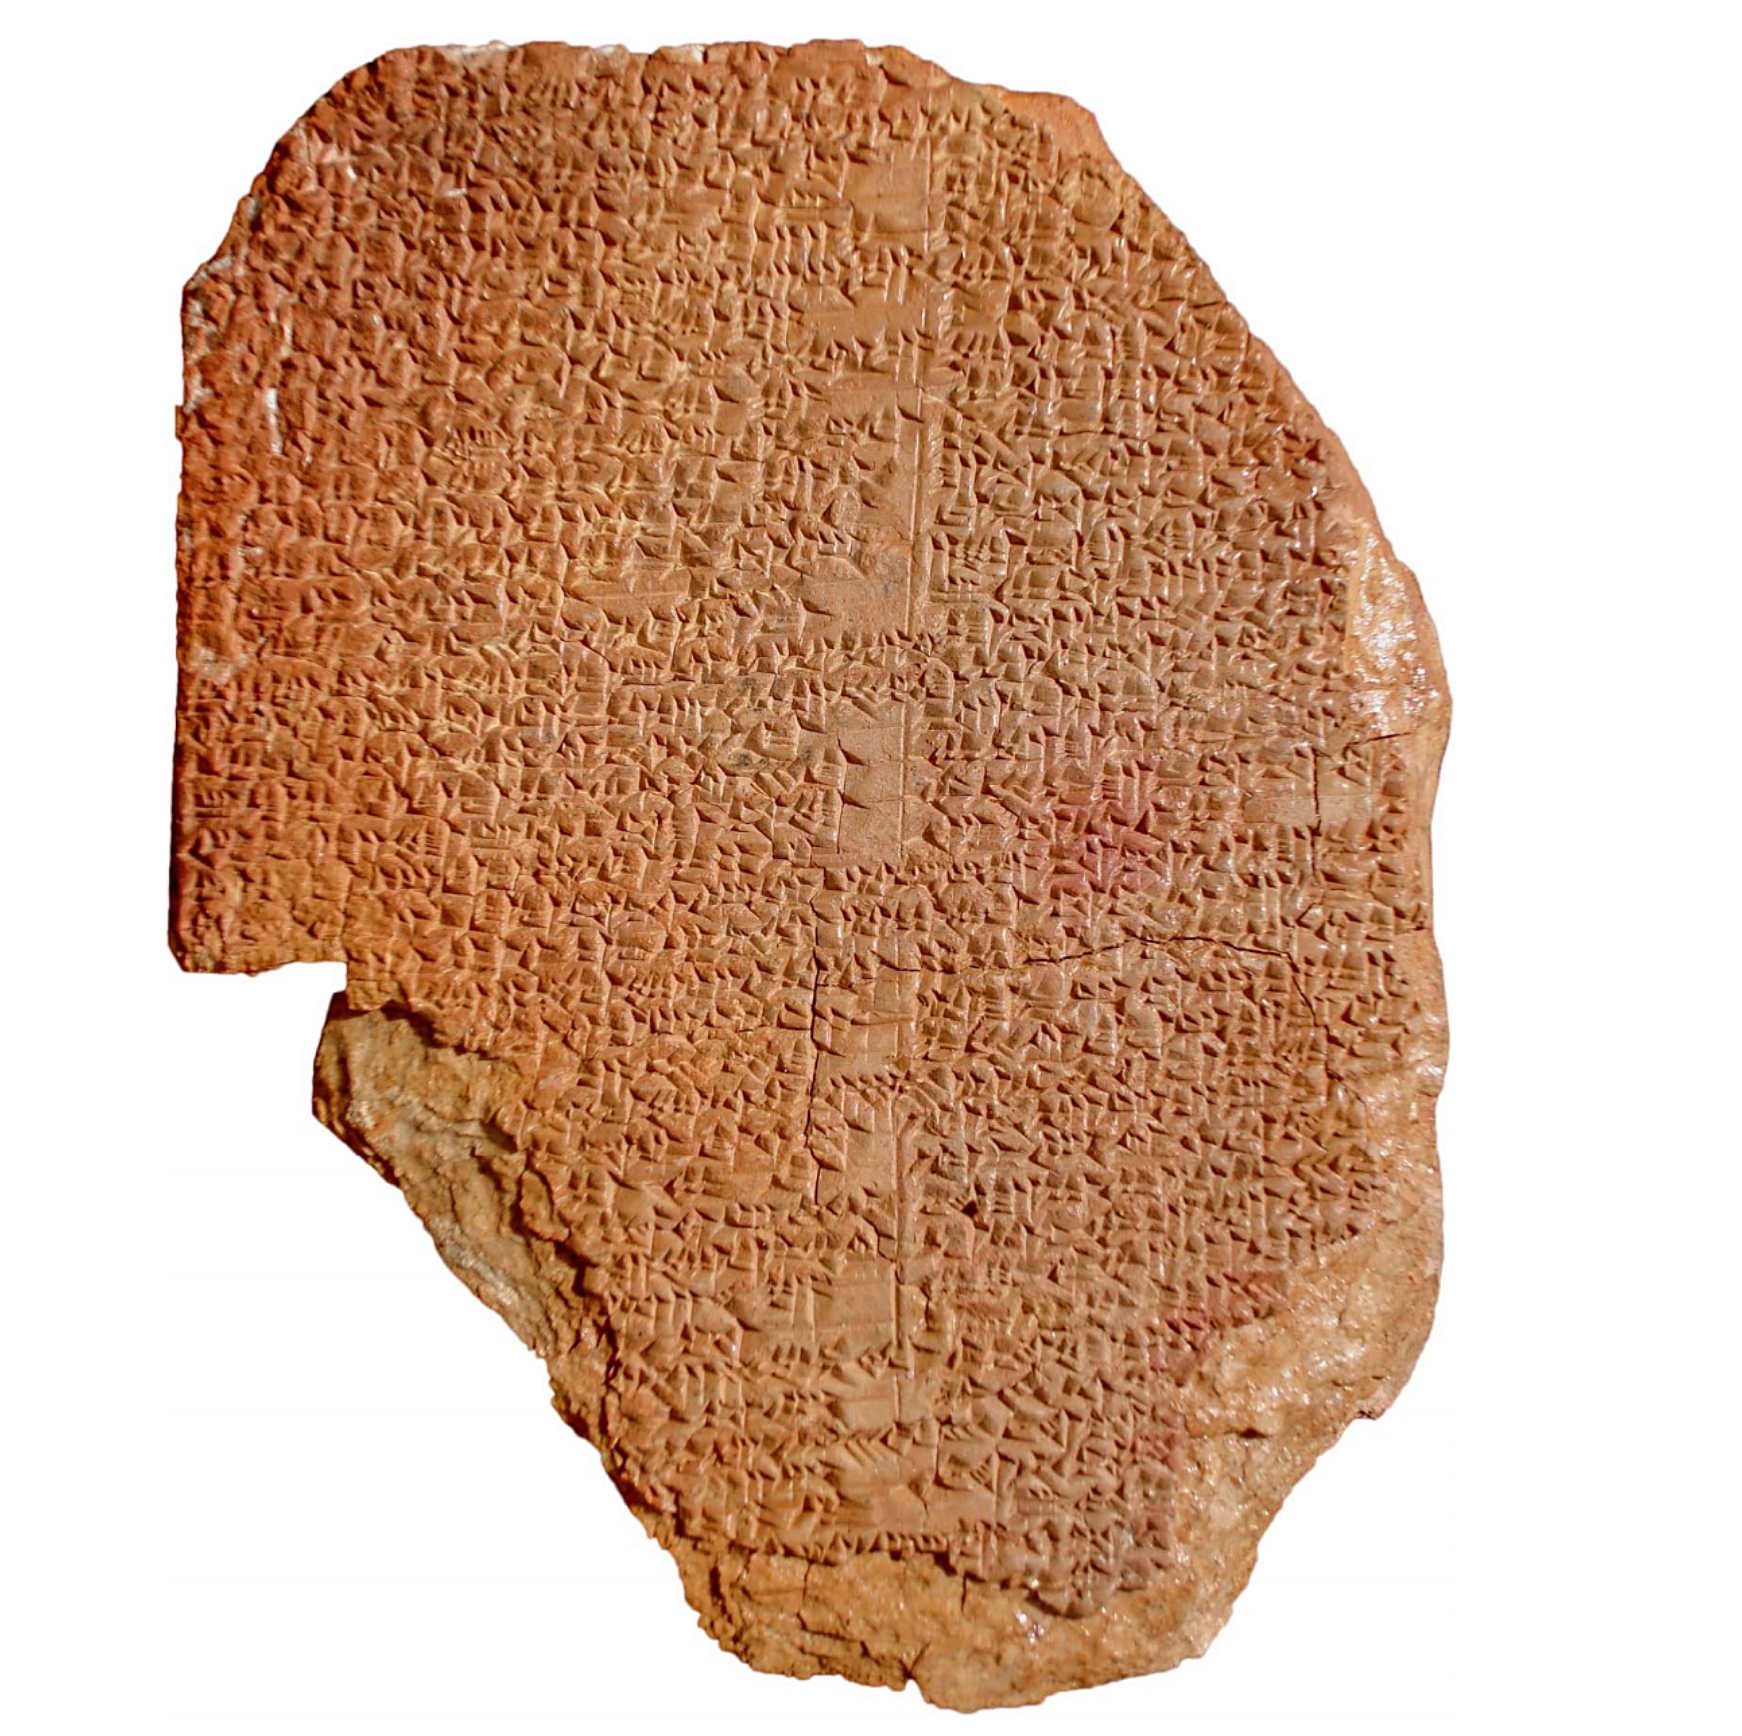 Cunieform tablet bearing part of the Epic of Gilgamesh